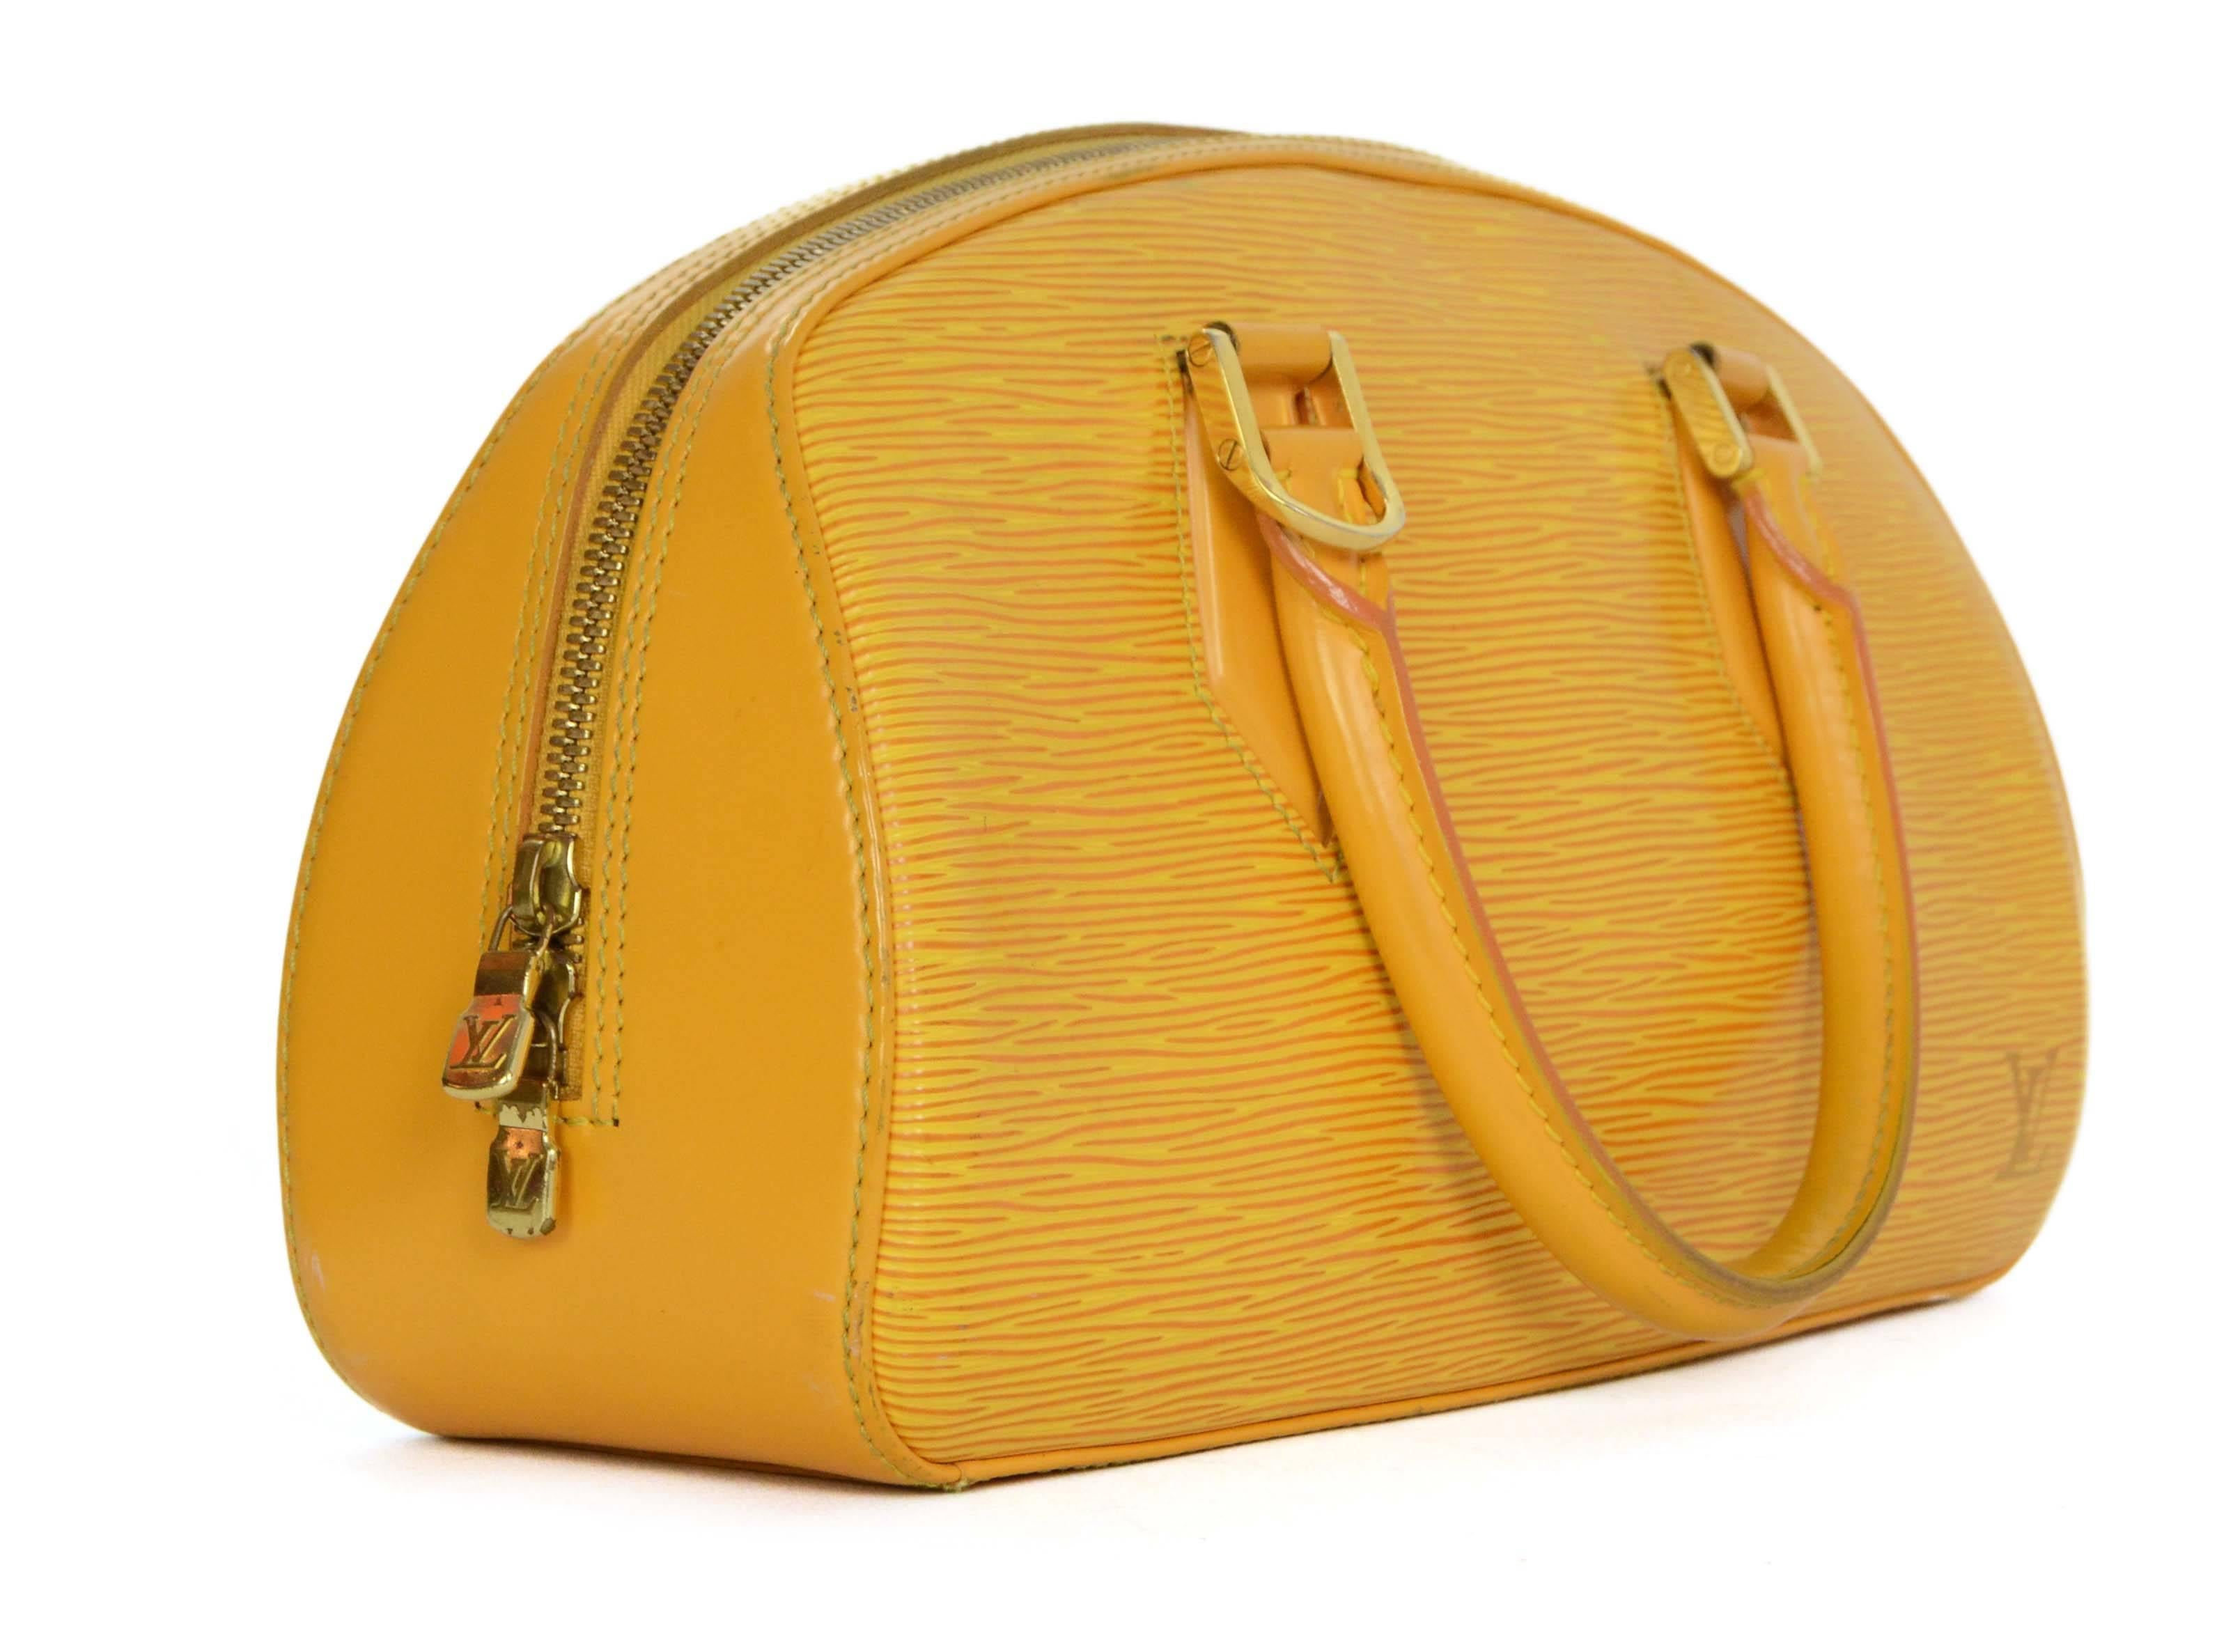 Louis Vuitton Yellow Epi Leather Jasmin Bag 
Features small LV on front corner of bag
Made In: France
Year of Production: 2003
Color: Yellow
Hardware: Goldtone
Materials: Epi leather
Lining: Purple microfiber
Closure/Opening: Double zip